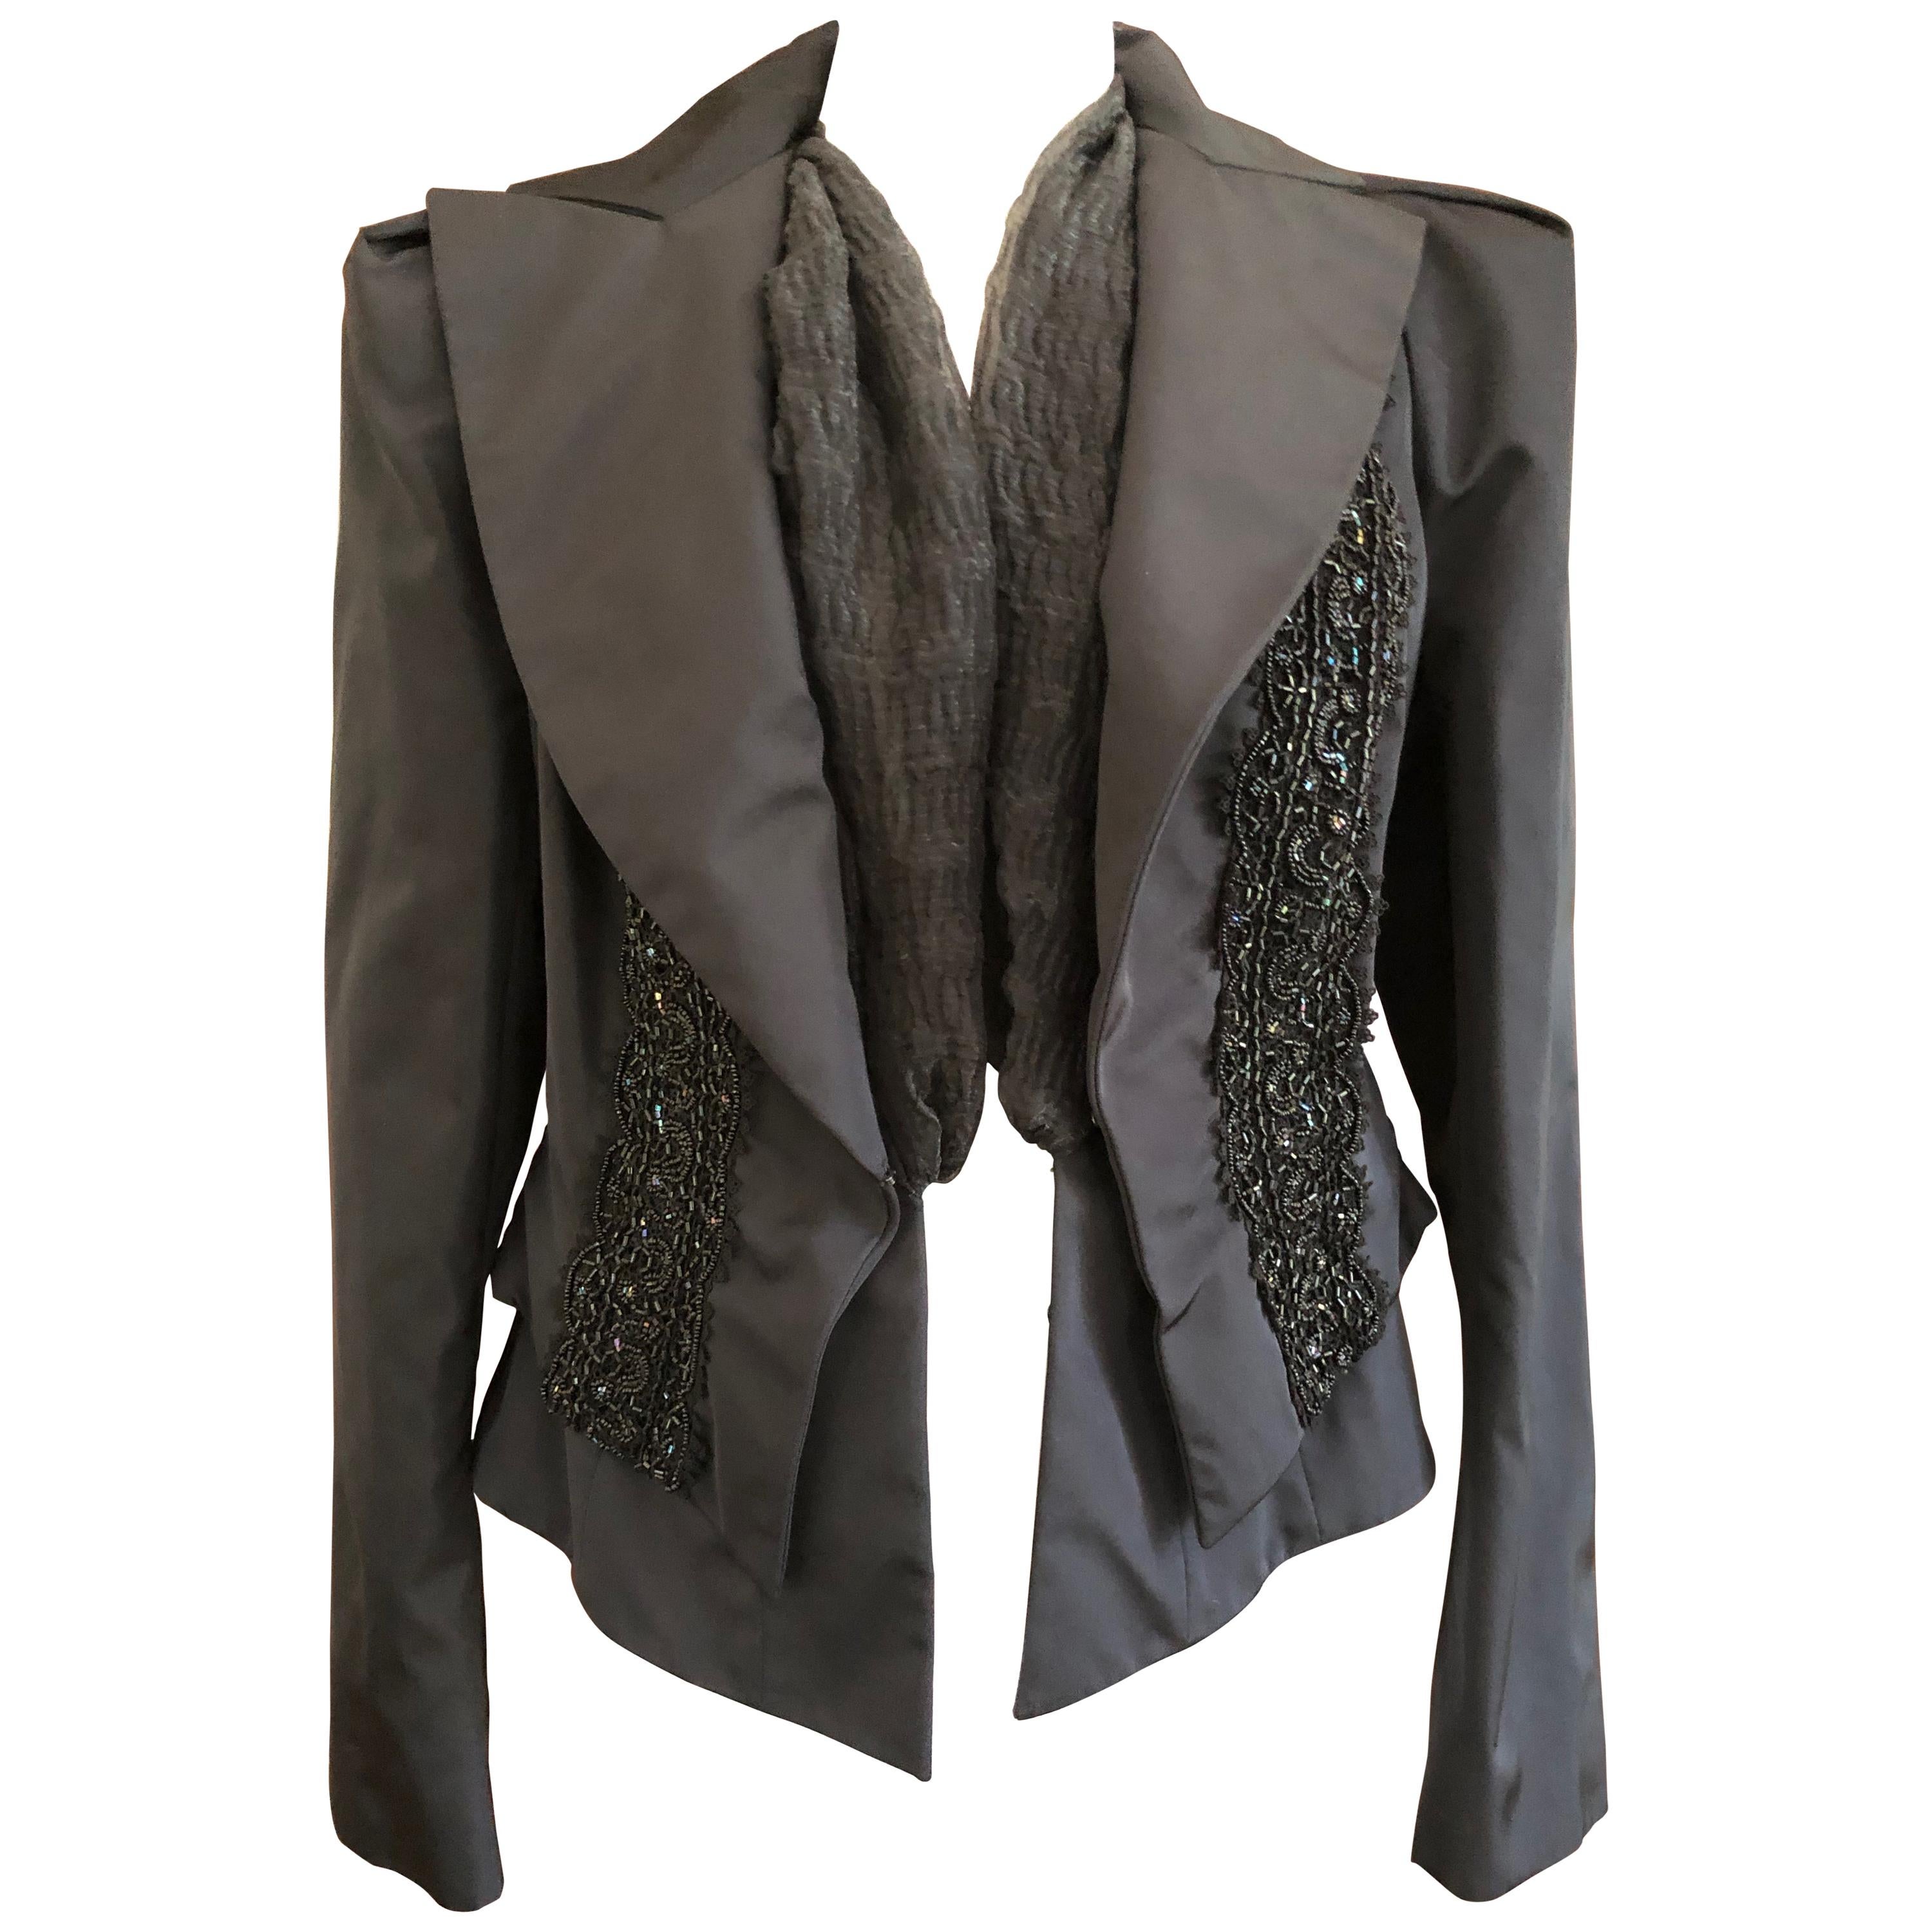 Christian Lacroix Vintage Black Beaded Evening Jacket from Autumn 1999 For Sale